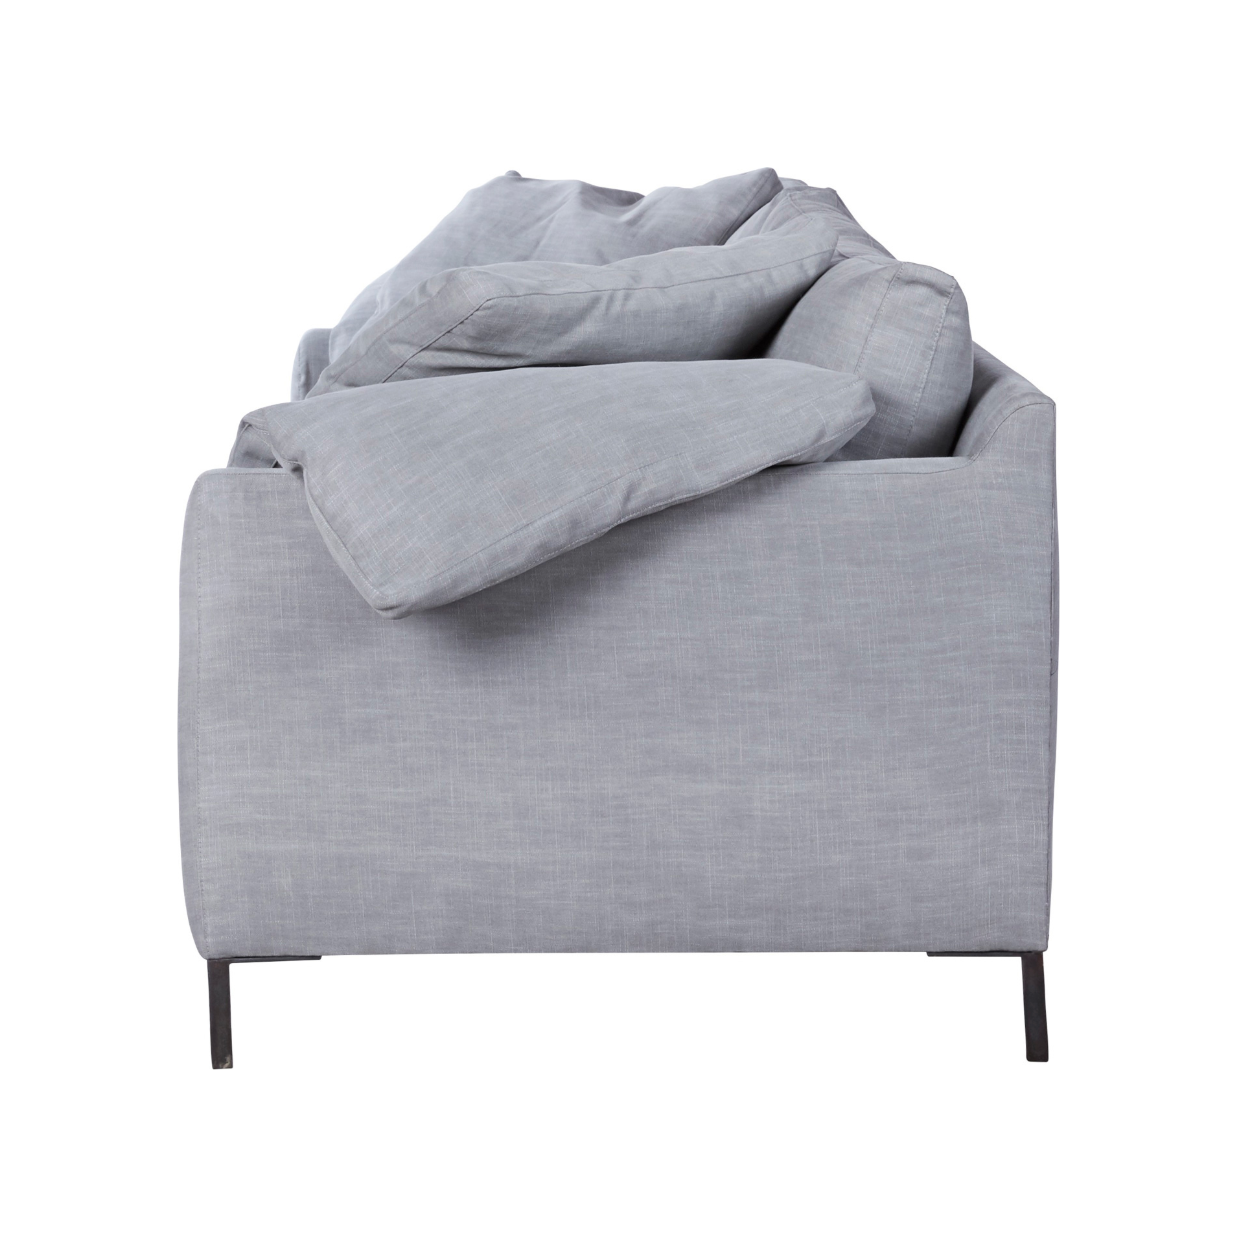 A love letter to the Radley sofa -- the metal iron feet and laid back approach to sitting is effortlessly chic.  A feather cloud cushion with down filled back cushions allow for a sit that is upright yet comfortably deep.  90"w x 30"h x 38"d Seat Space: 81"w x 25"d x 20"h